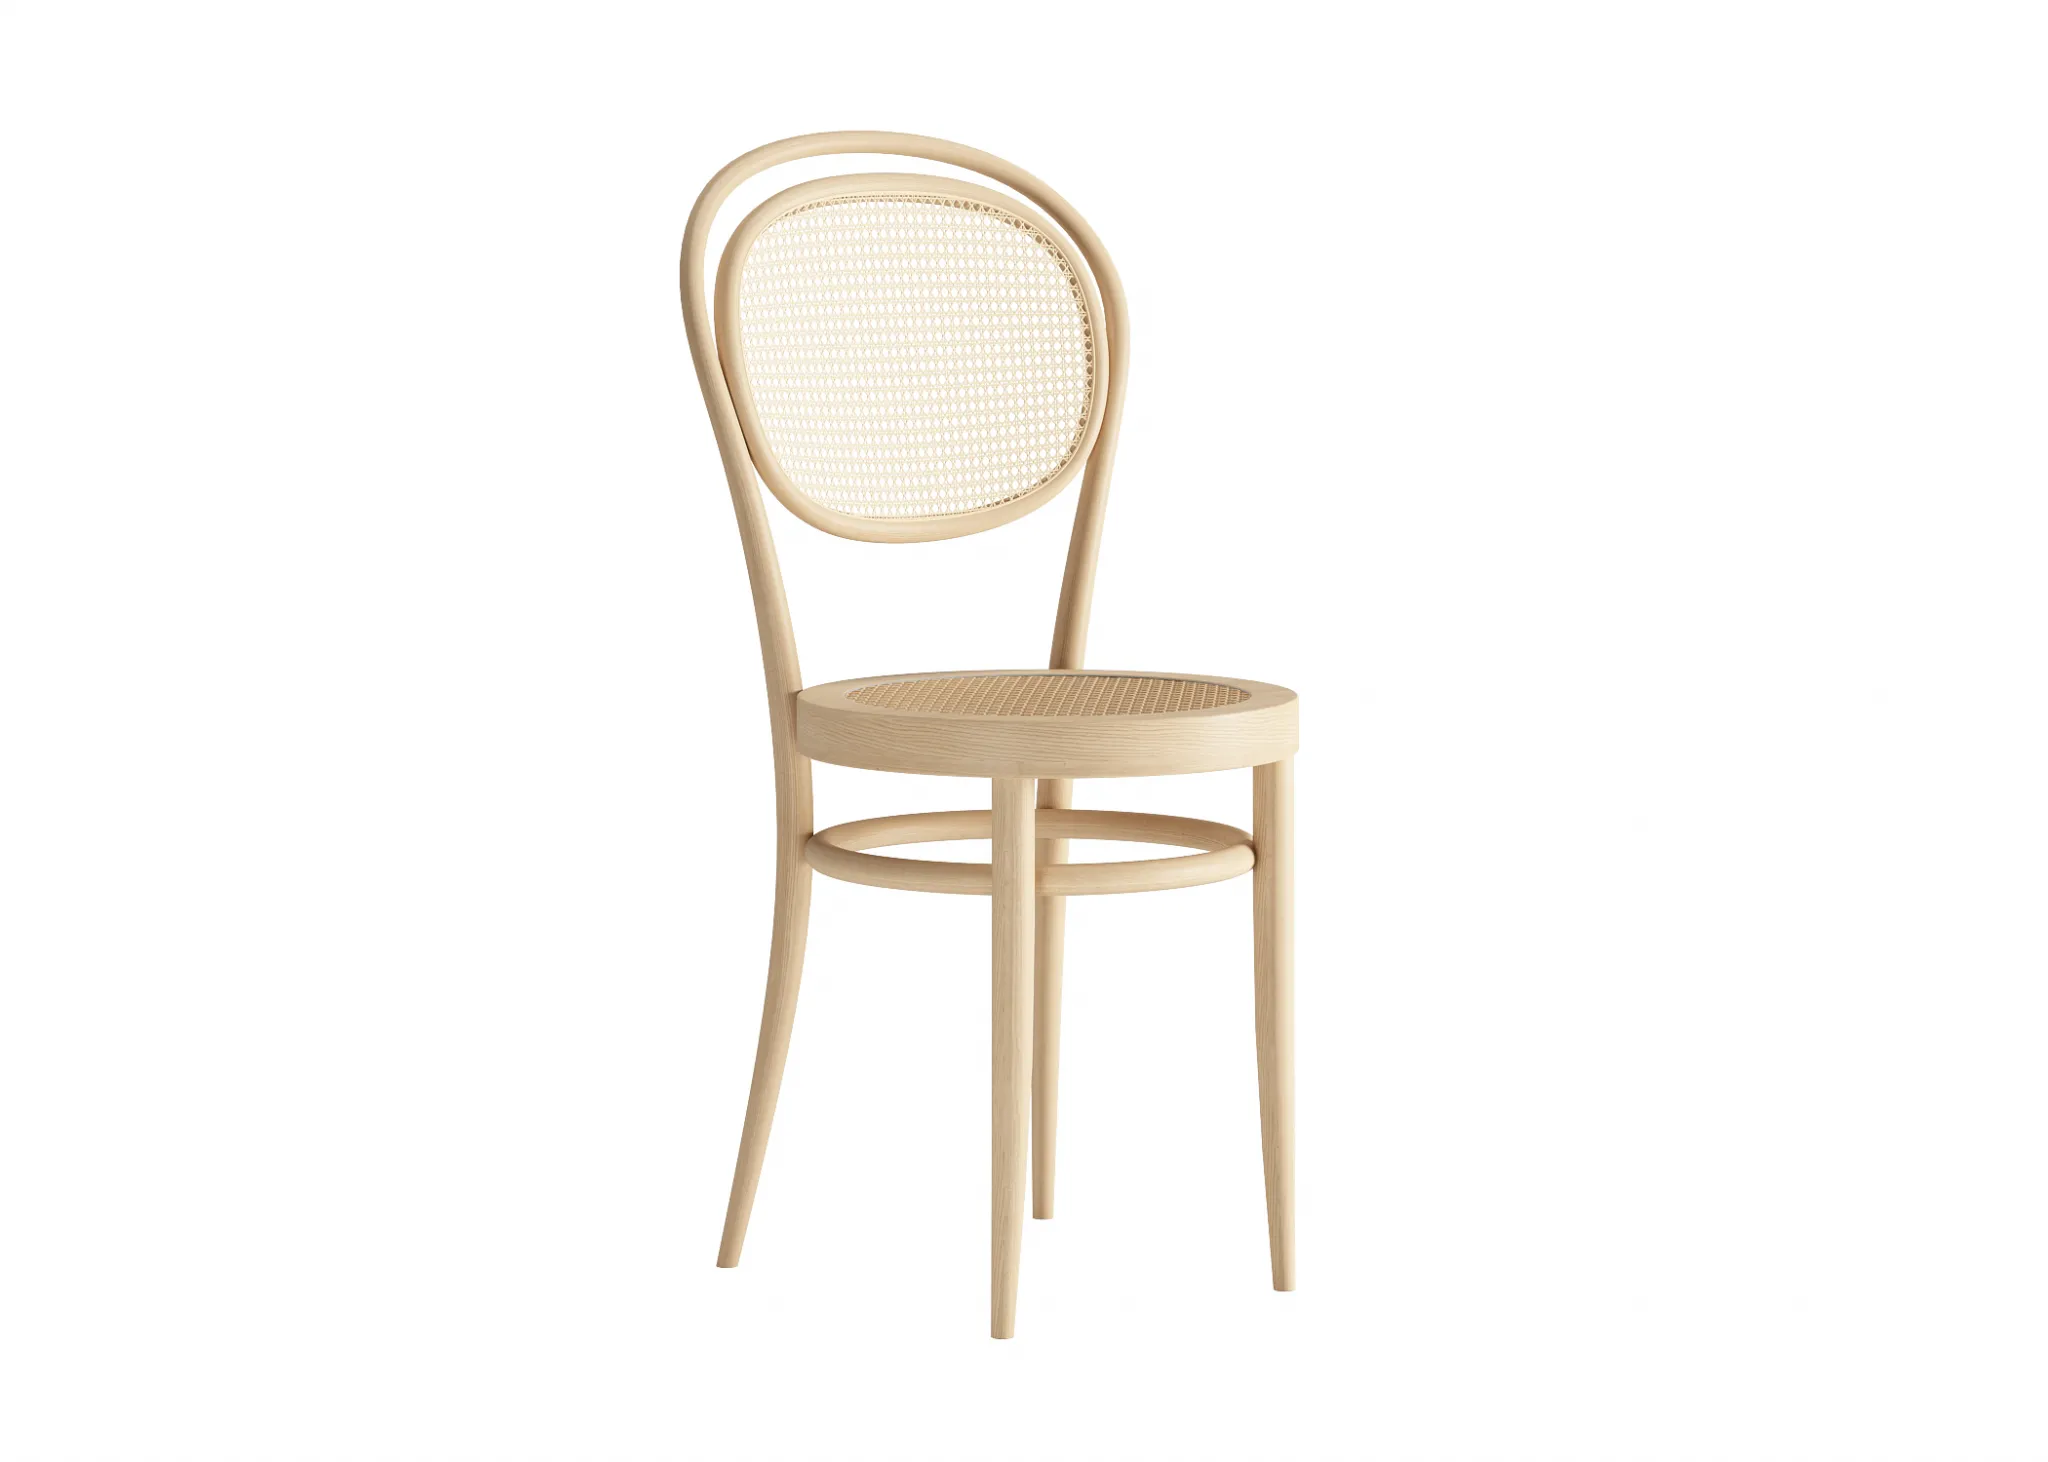 FURNITURE 3D MODELS – CHAIRS – 0500